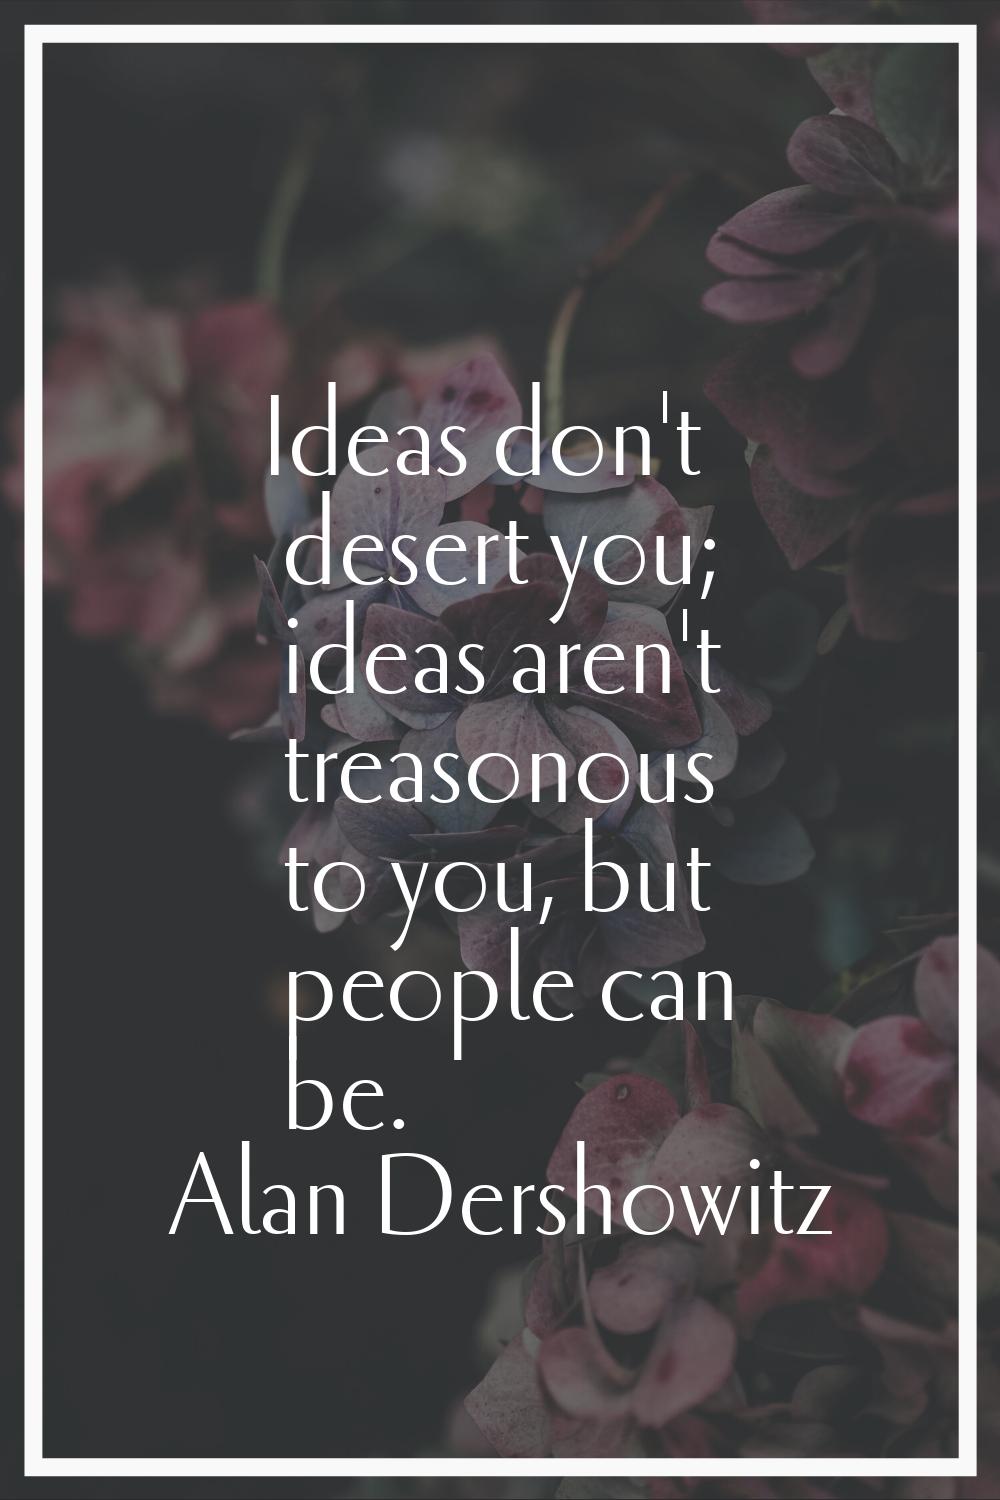 Ideas don't desert you; ideas aren't treasonous to you, but people can be.